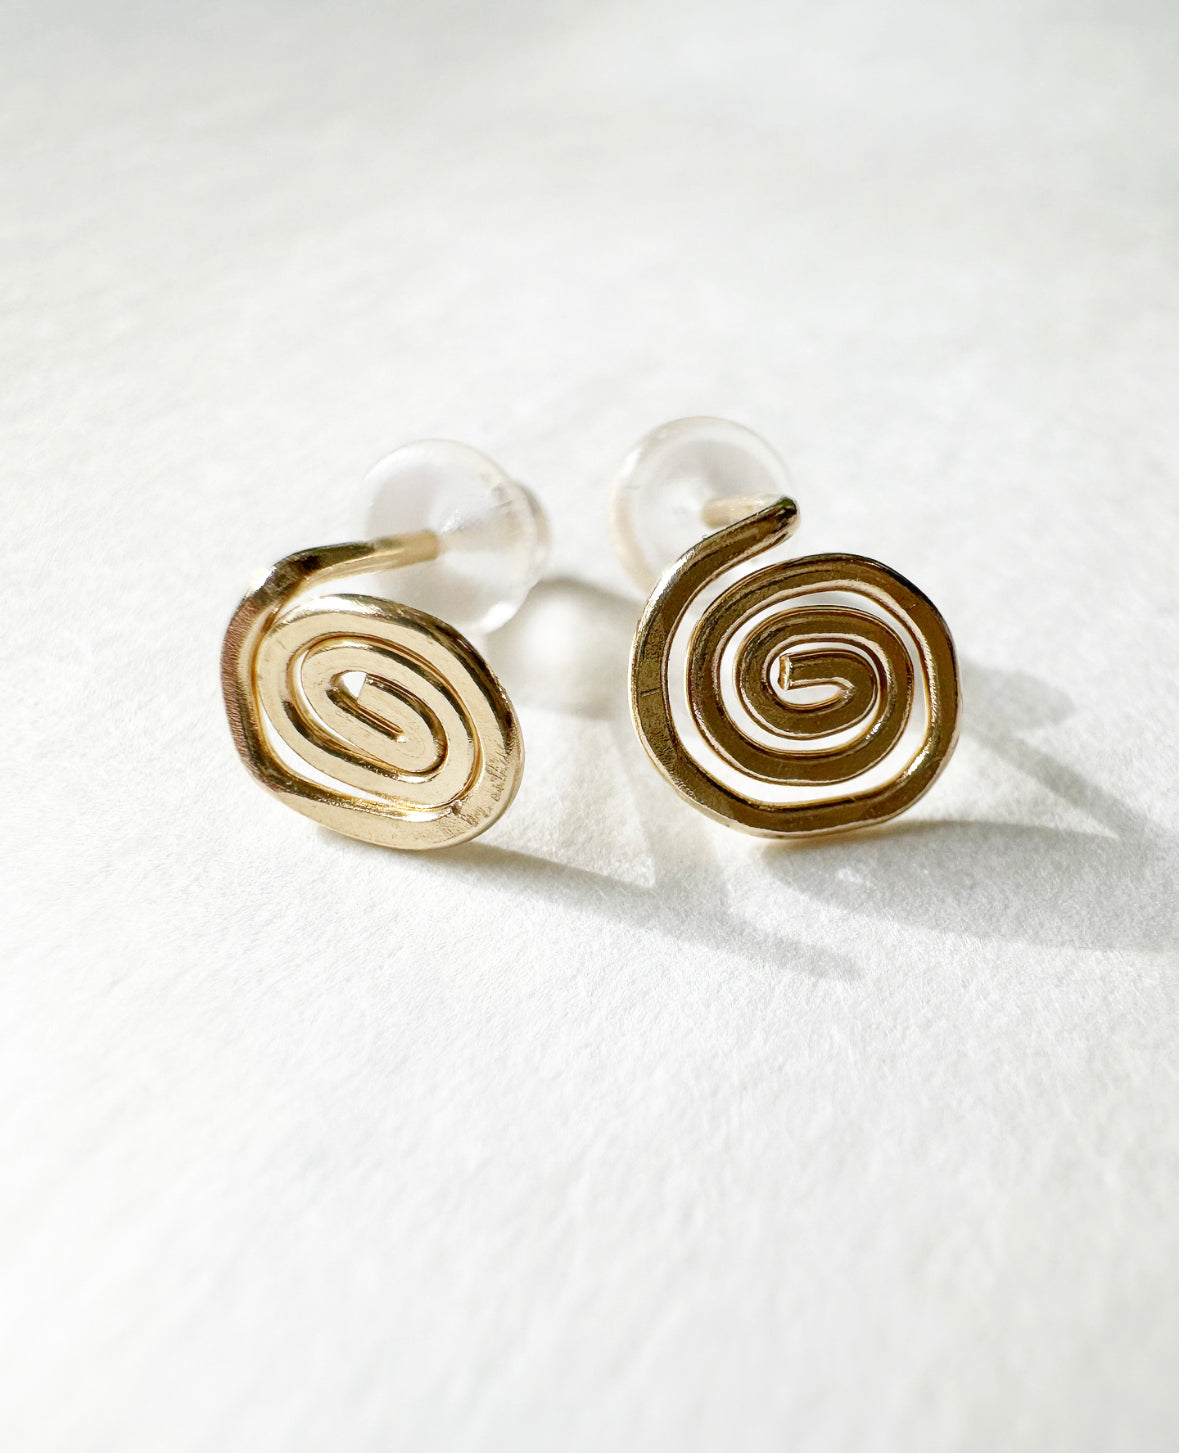 Close-up of 14k Gold Vortex Stud Earrings.